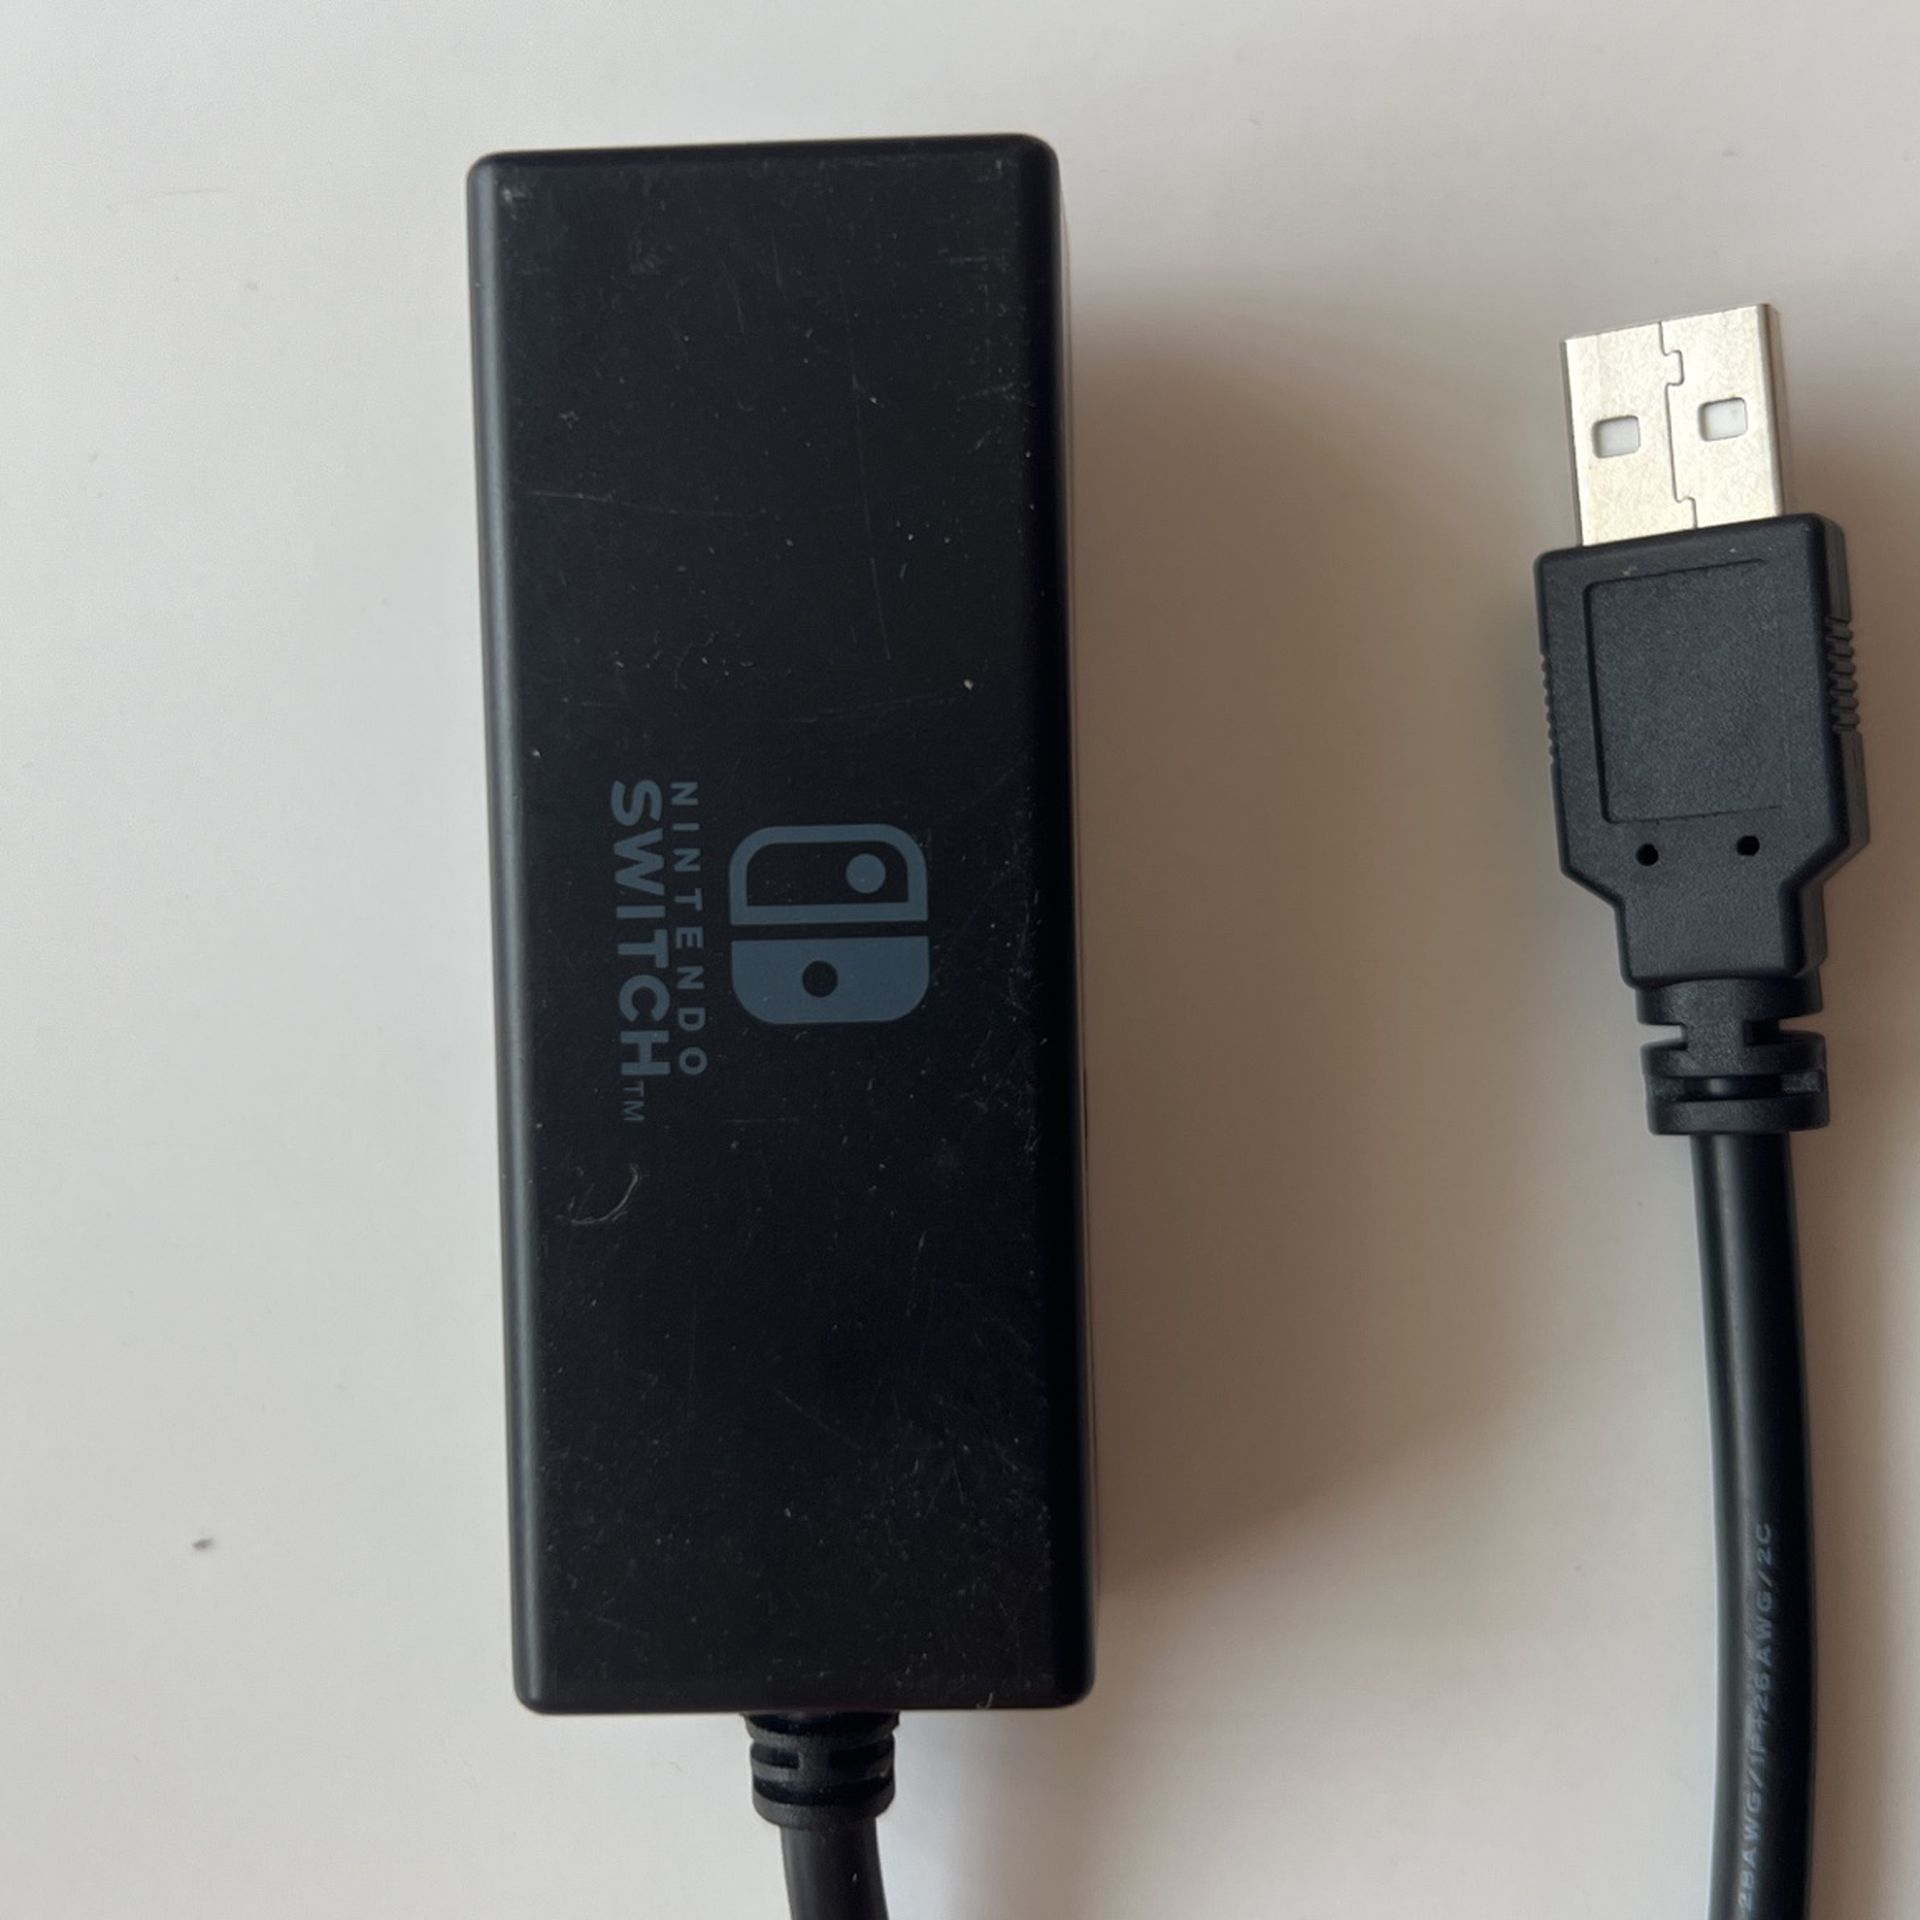 Nintendo Switch Wired Internet Adapter for Sale in Los Angeles, - OfferUp